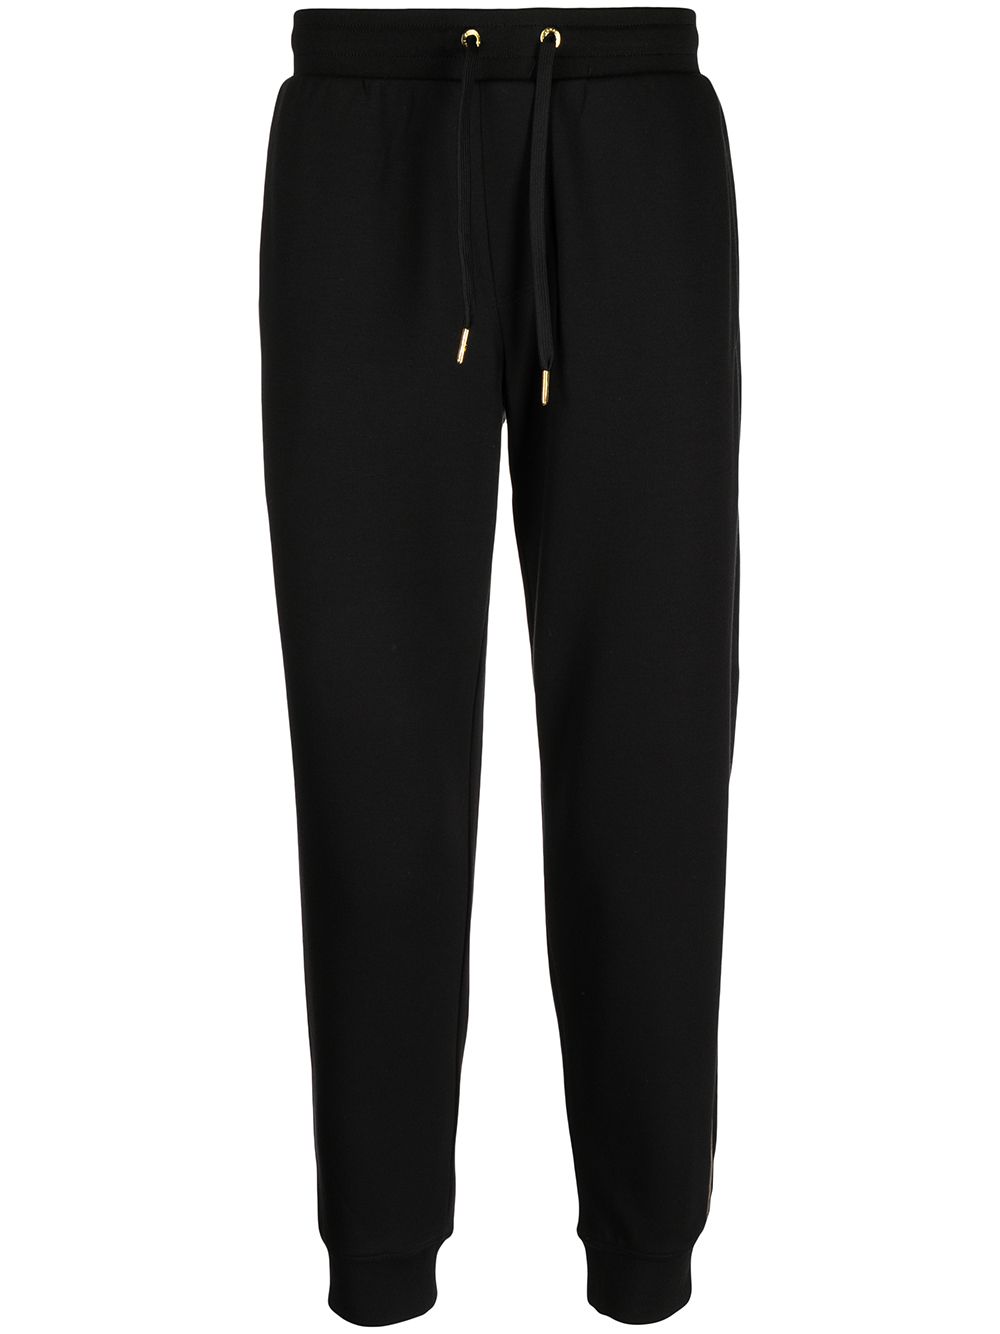 undefined | Armani Exchange logo-tape tapered track pants